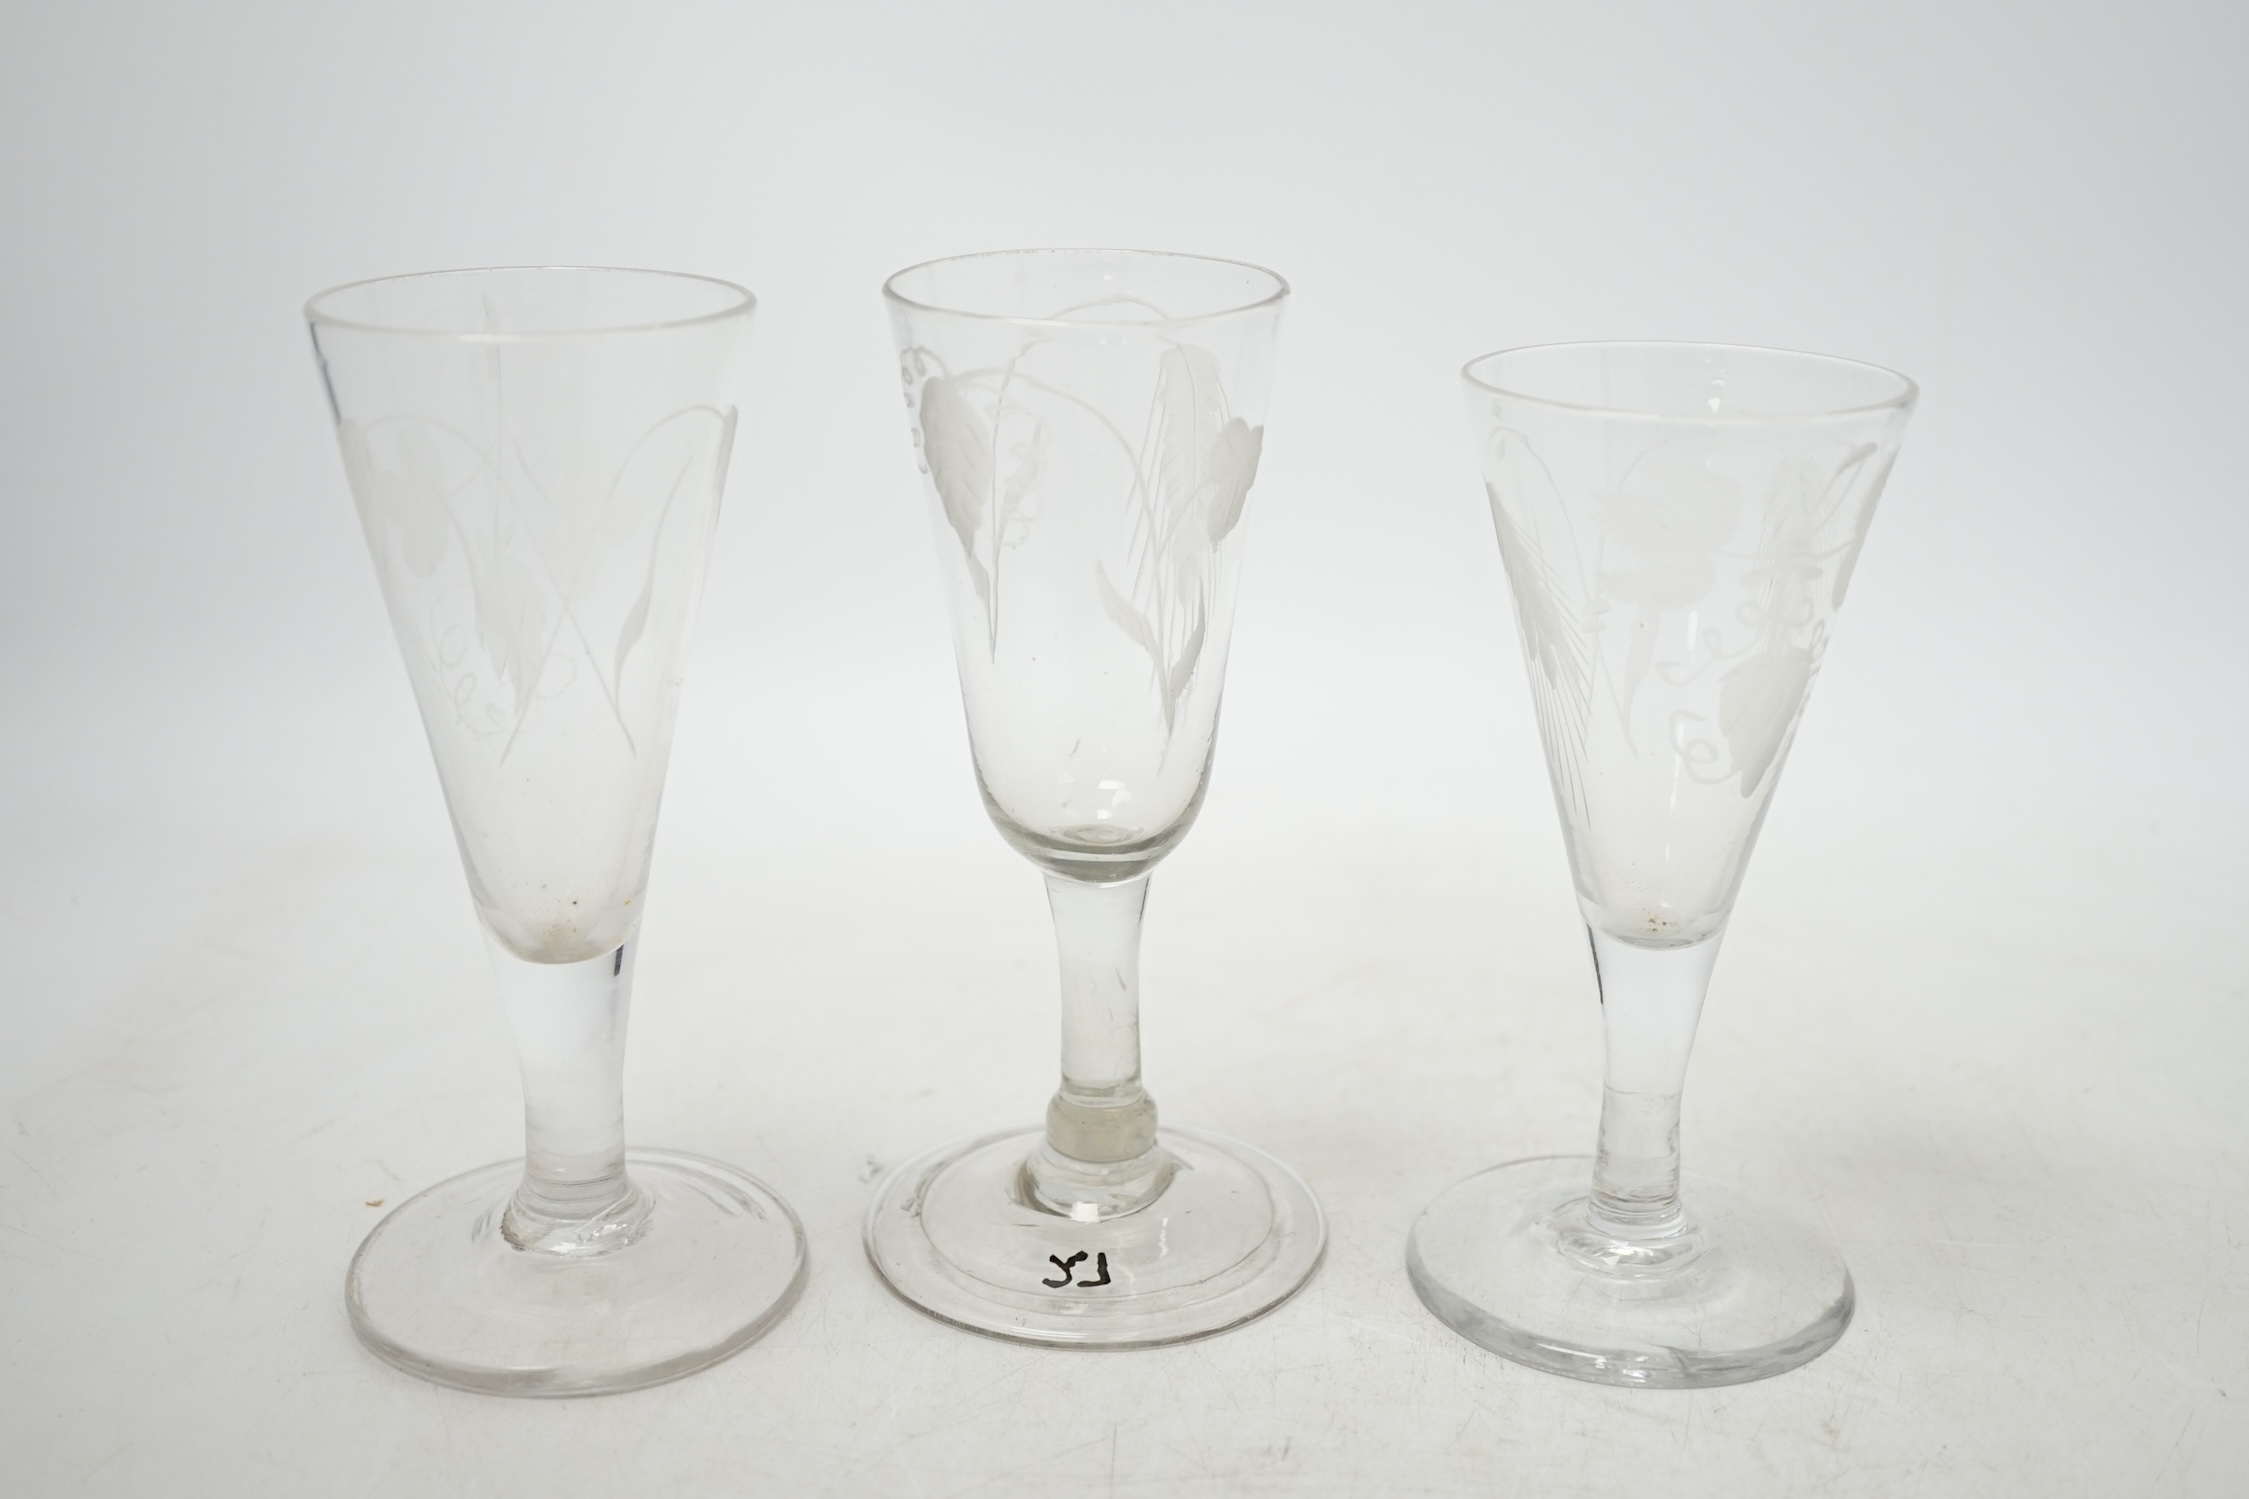 Three mid 18th century engraved ale glasses, all with hop decoration to the bowls, 14cm. Condition - good